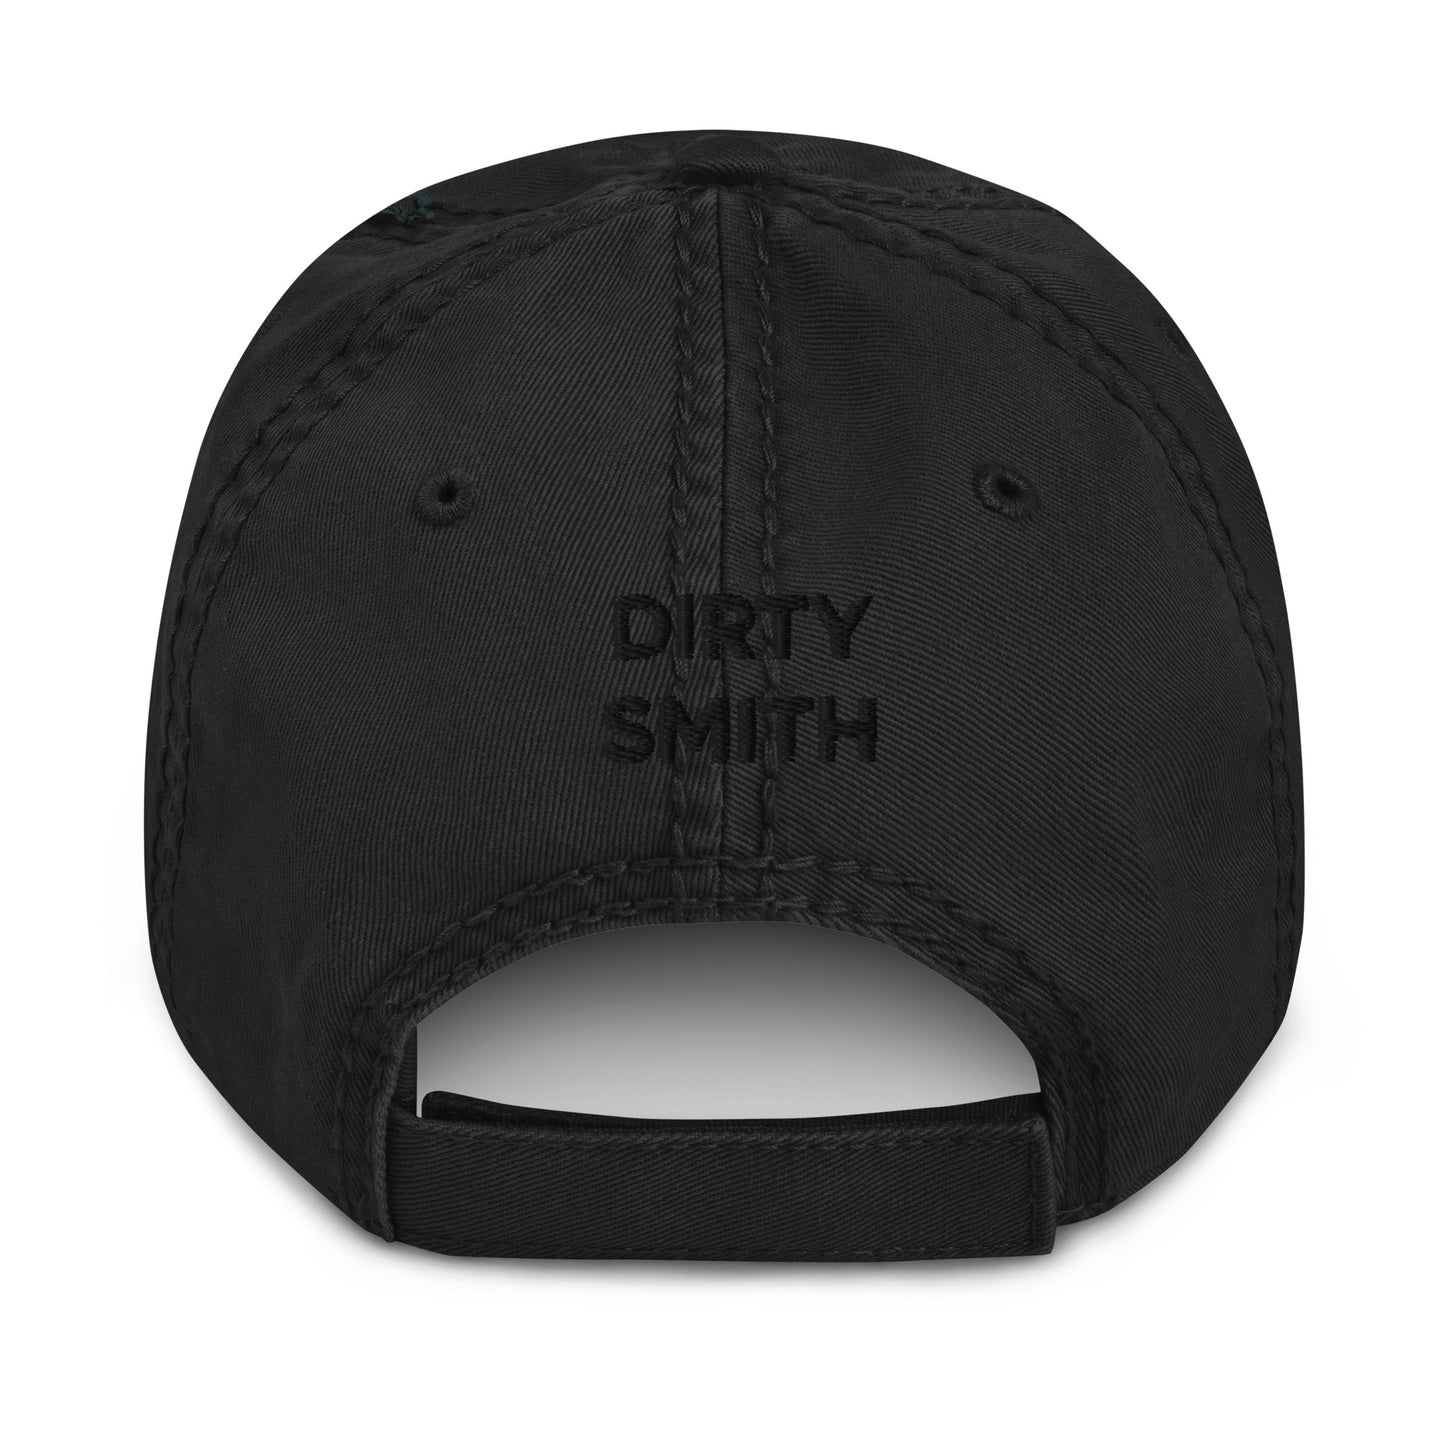 Dirty Smith Distressed Hat (Adjustable)